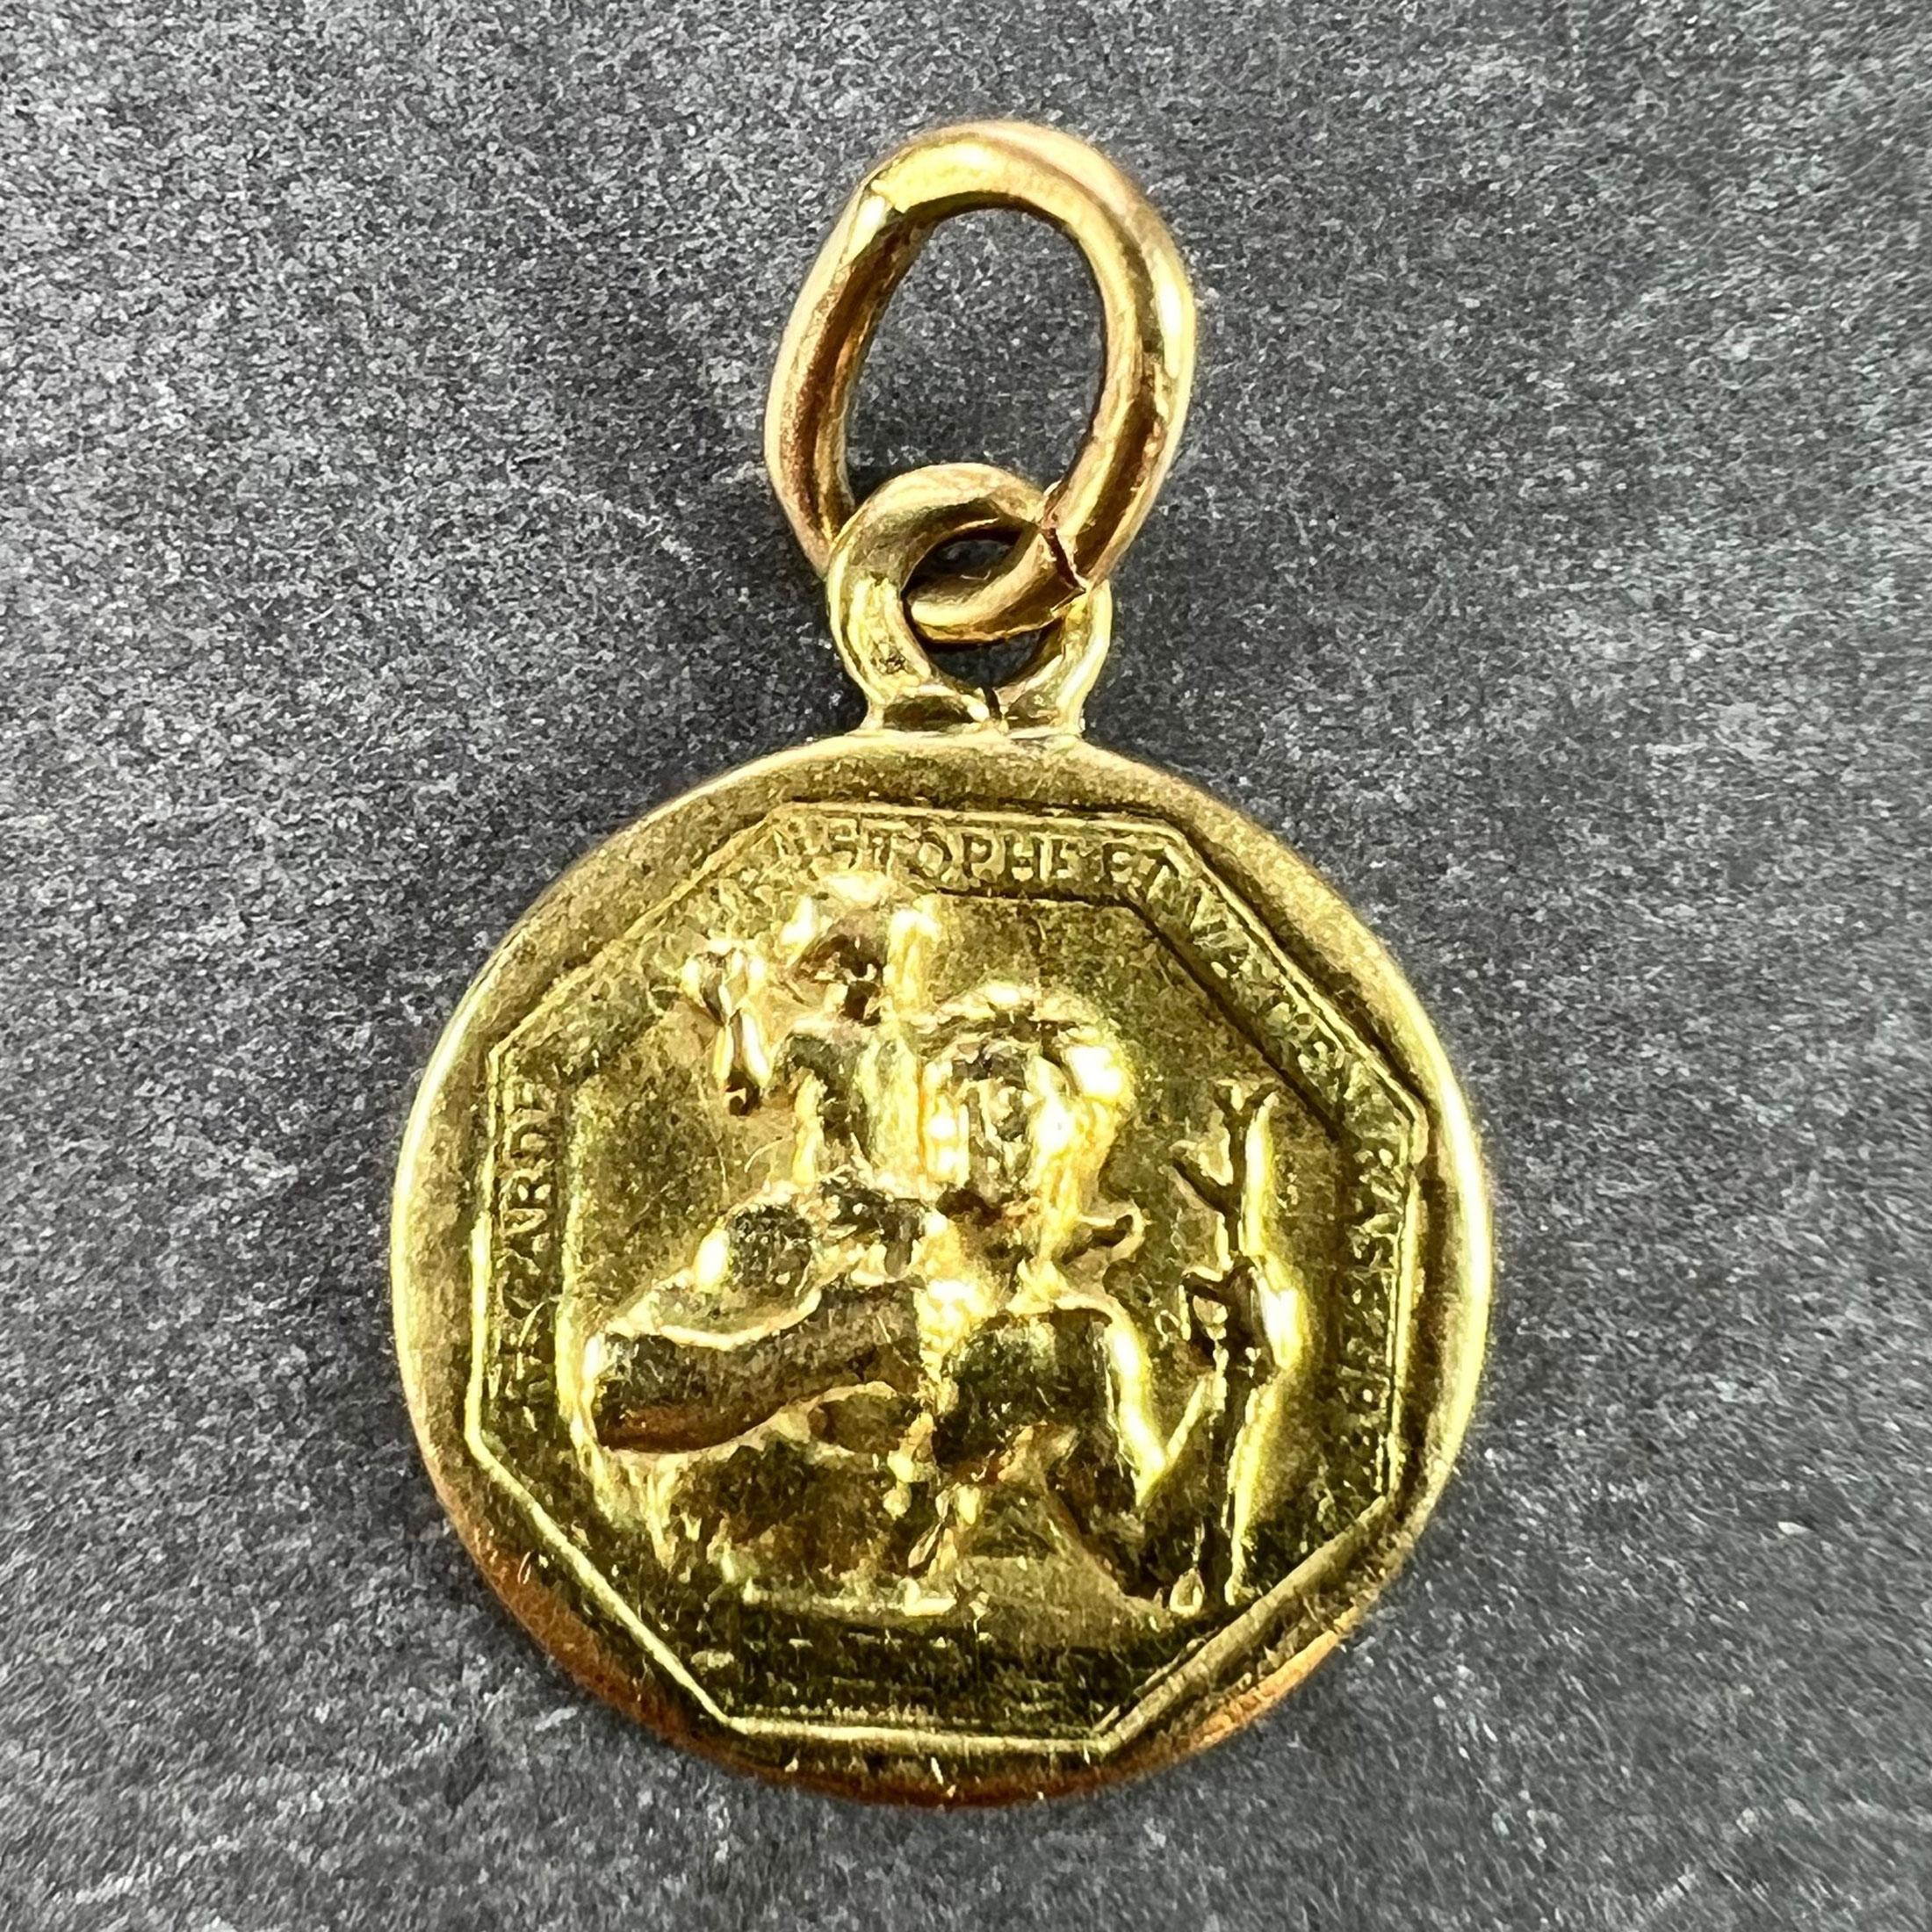 A French 18 karat (18K) yellow gold charm pendant designed as a medal depicting St Christopher as he carries the infant Christ across a river, with the motto of ‘Regarde St. Christophe et va t’en rassure' around the edge. Stamped with the eagle’s